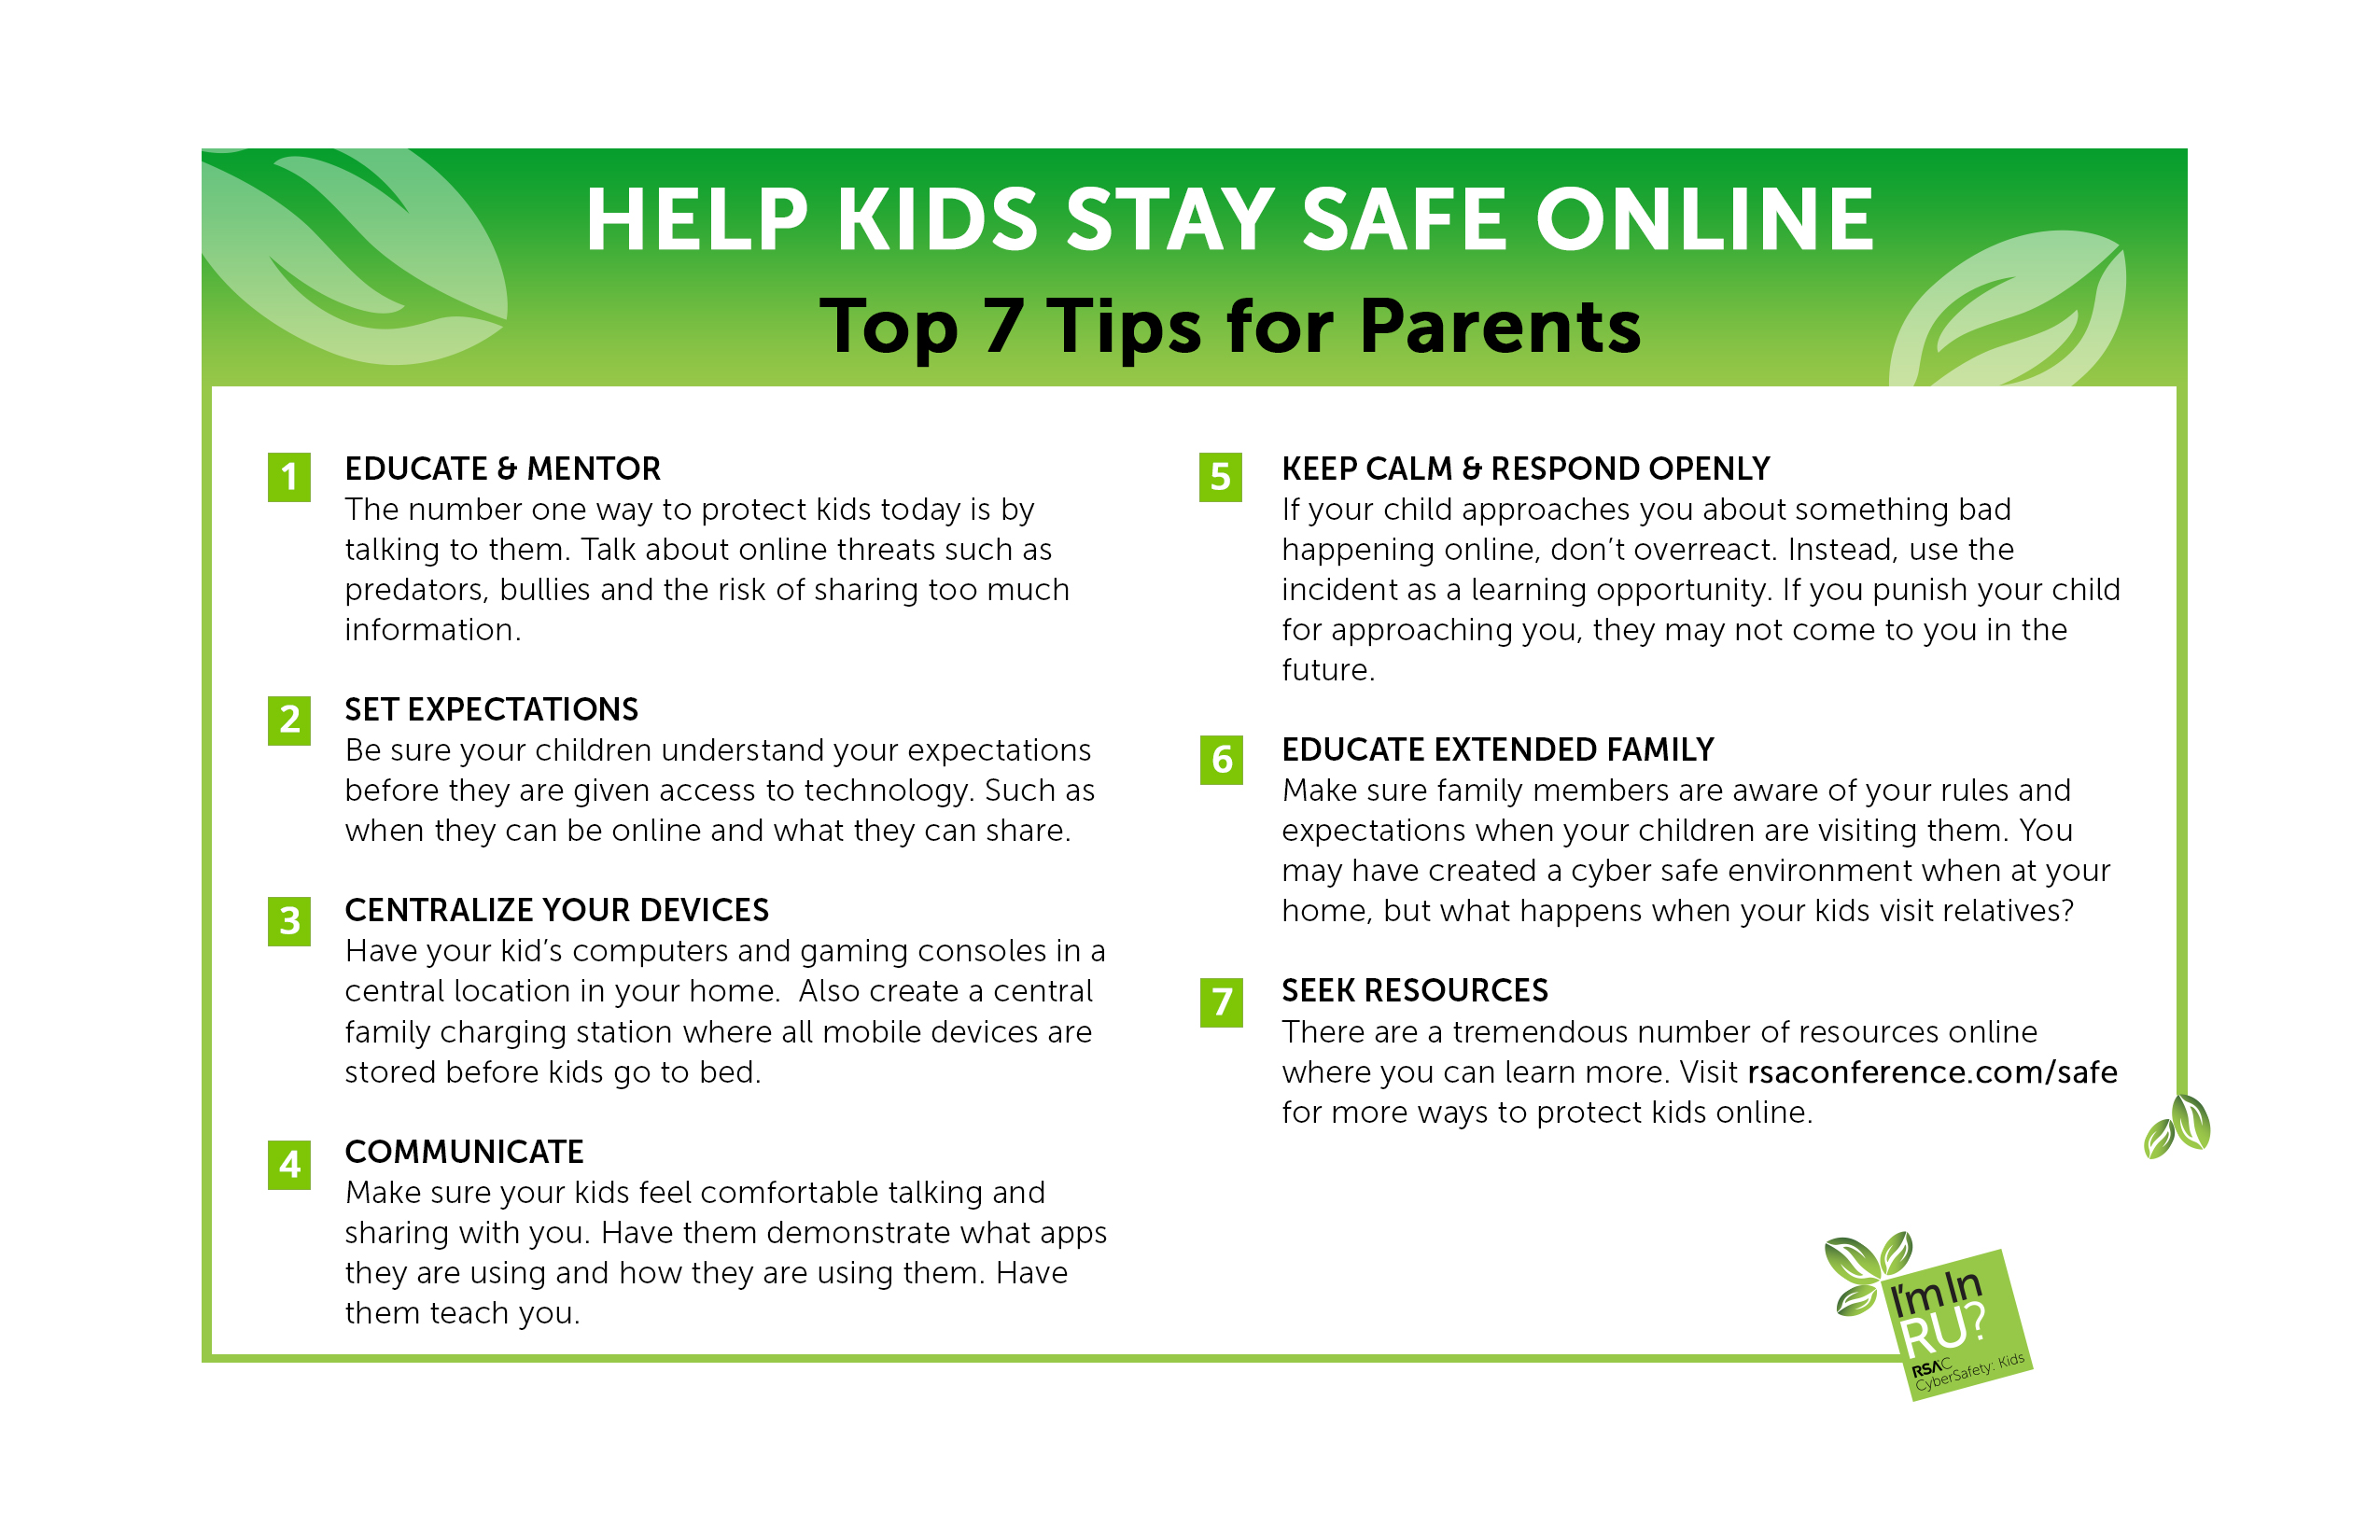 CyberSmart Parents - Online Safety Tips | RSA Conference